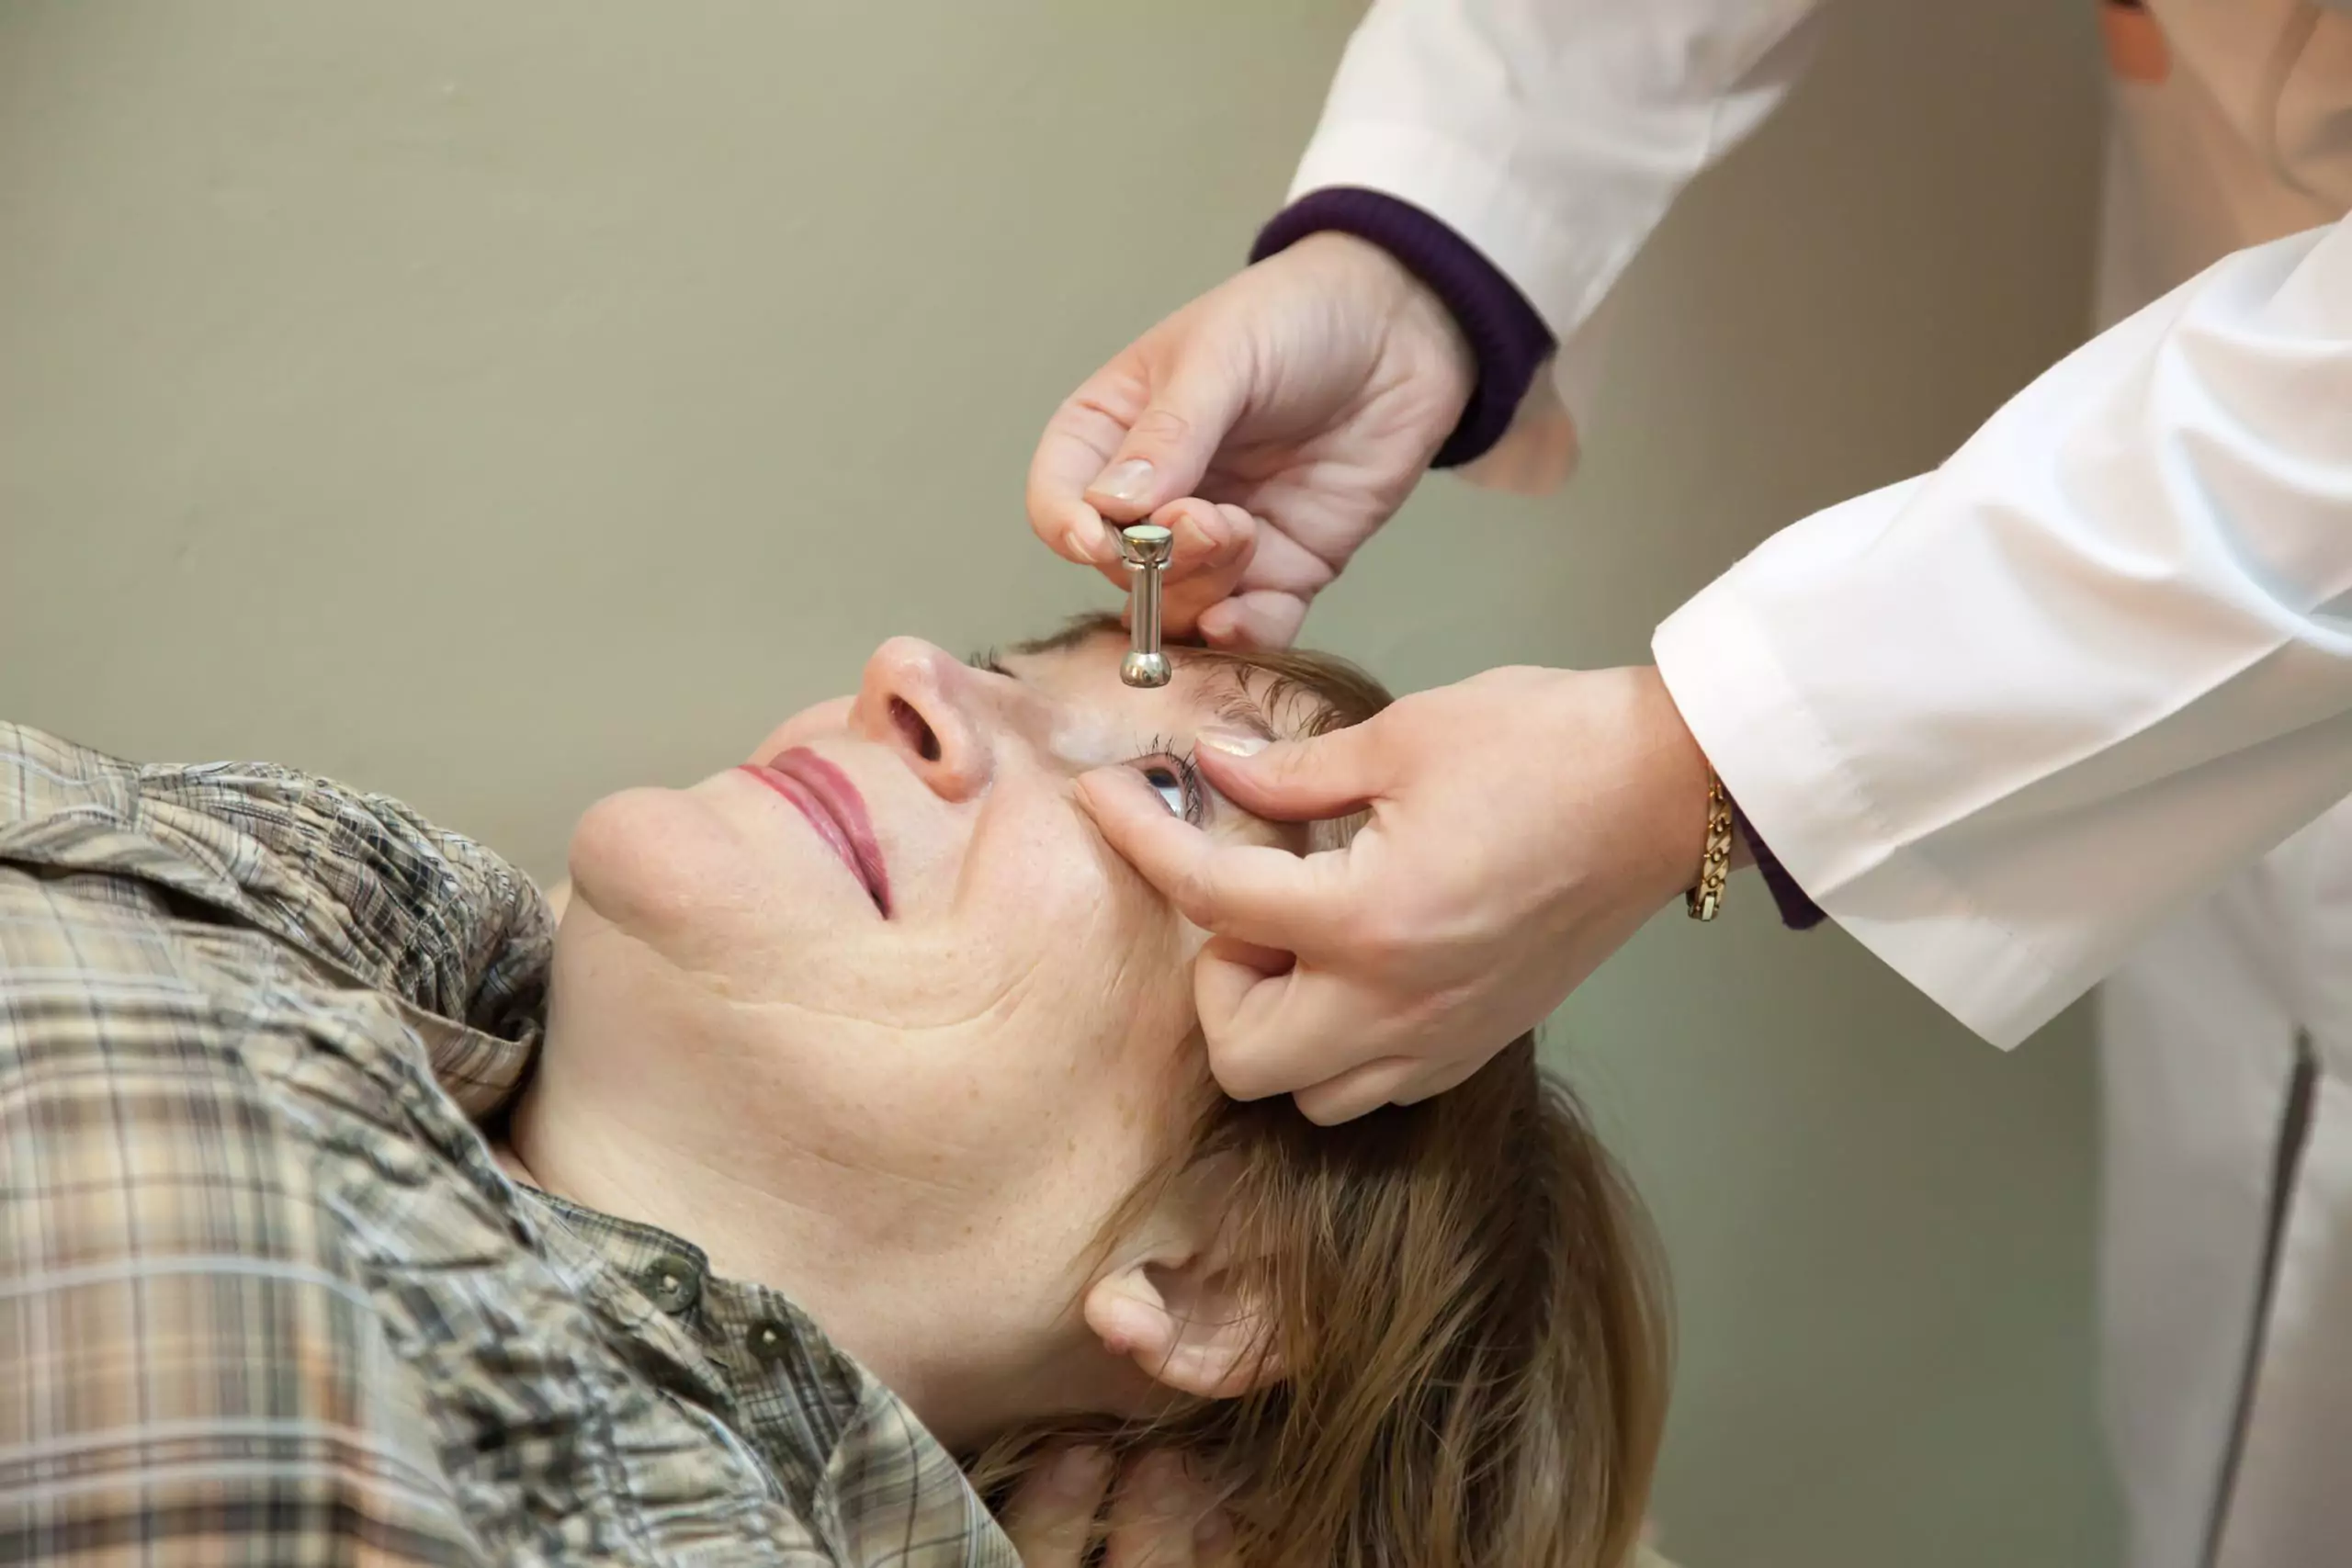 Ophthalmologist measures a patient's intraocular pressure (IOP) for glaucoma